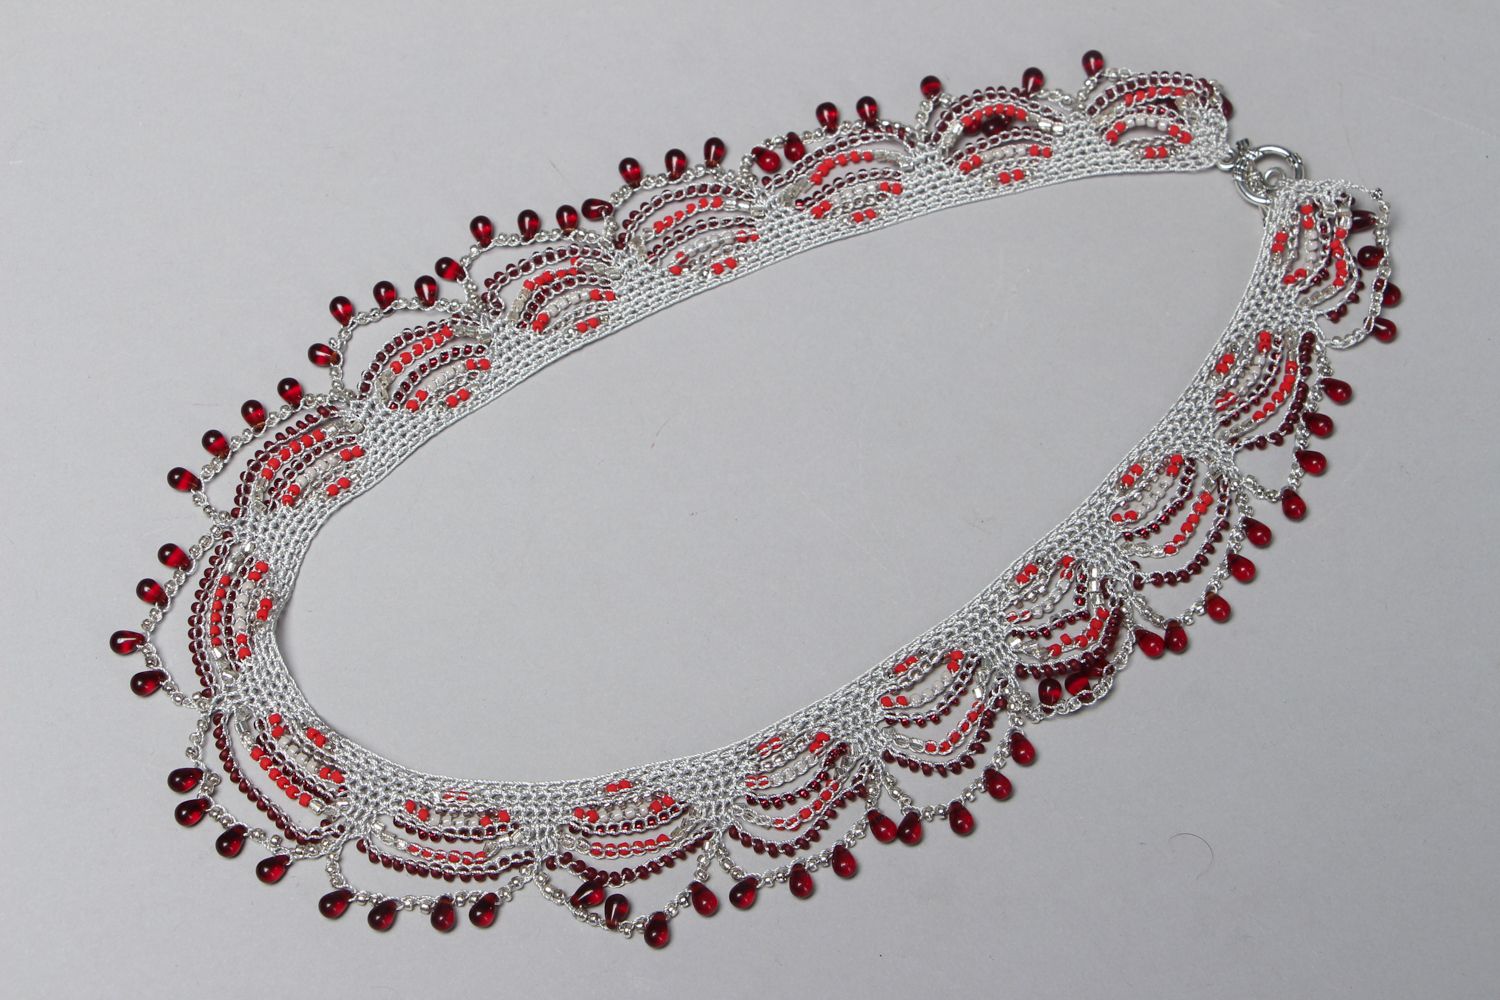 Crochet necklace with beads photo 1